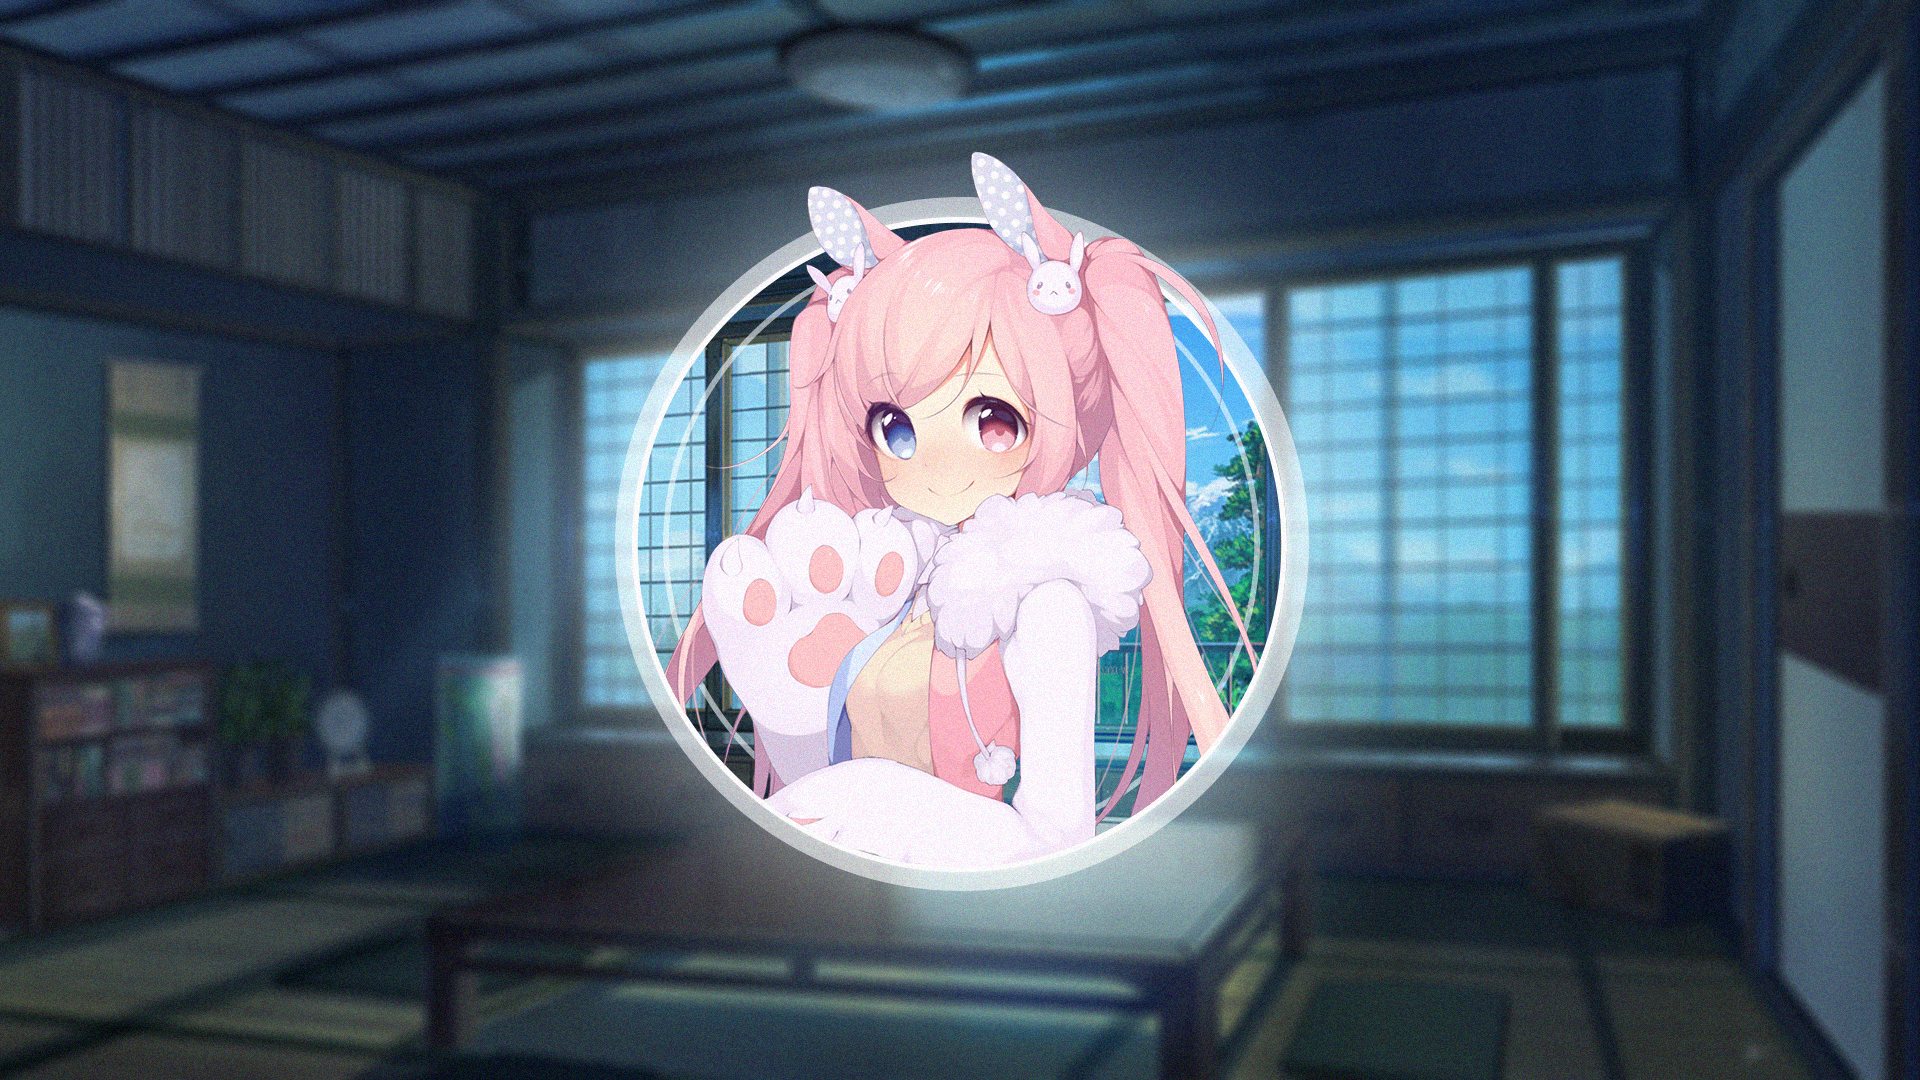 Picture In Picture Anime Anime Girls Bunny Ears Pink Hair Bunny Girl Tie Twintails Edit 2D Heterochr 1920x1080